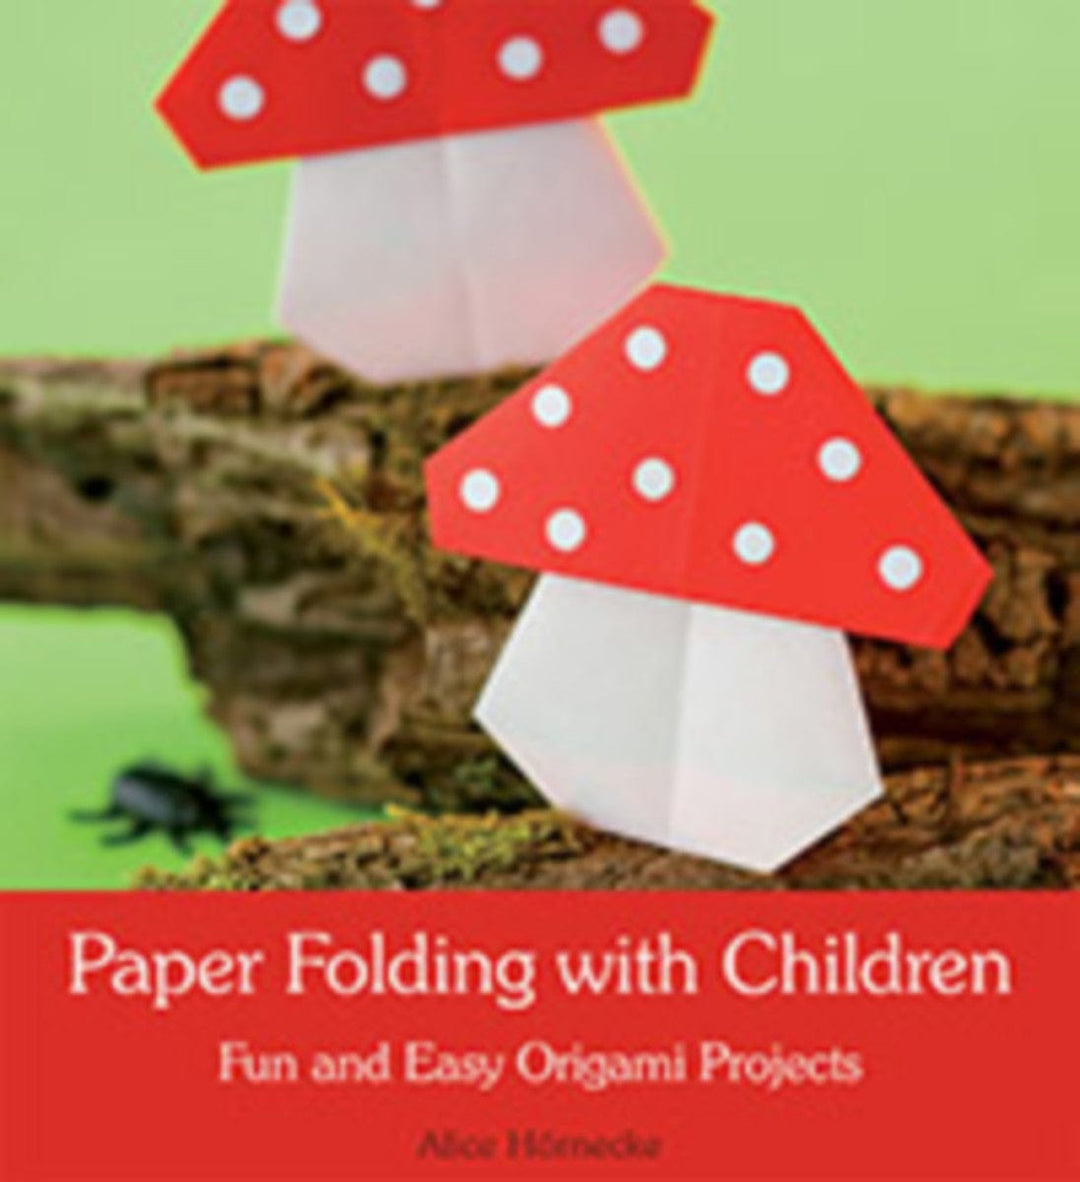 Default Paper Folding with Children: Fun and Easy Oragami Projects by Alice Hörnecke